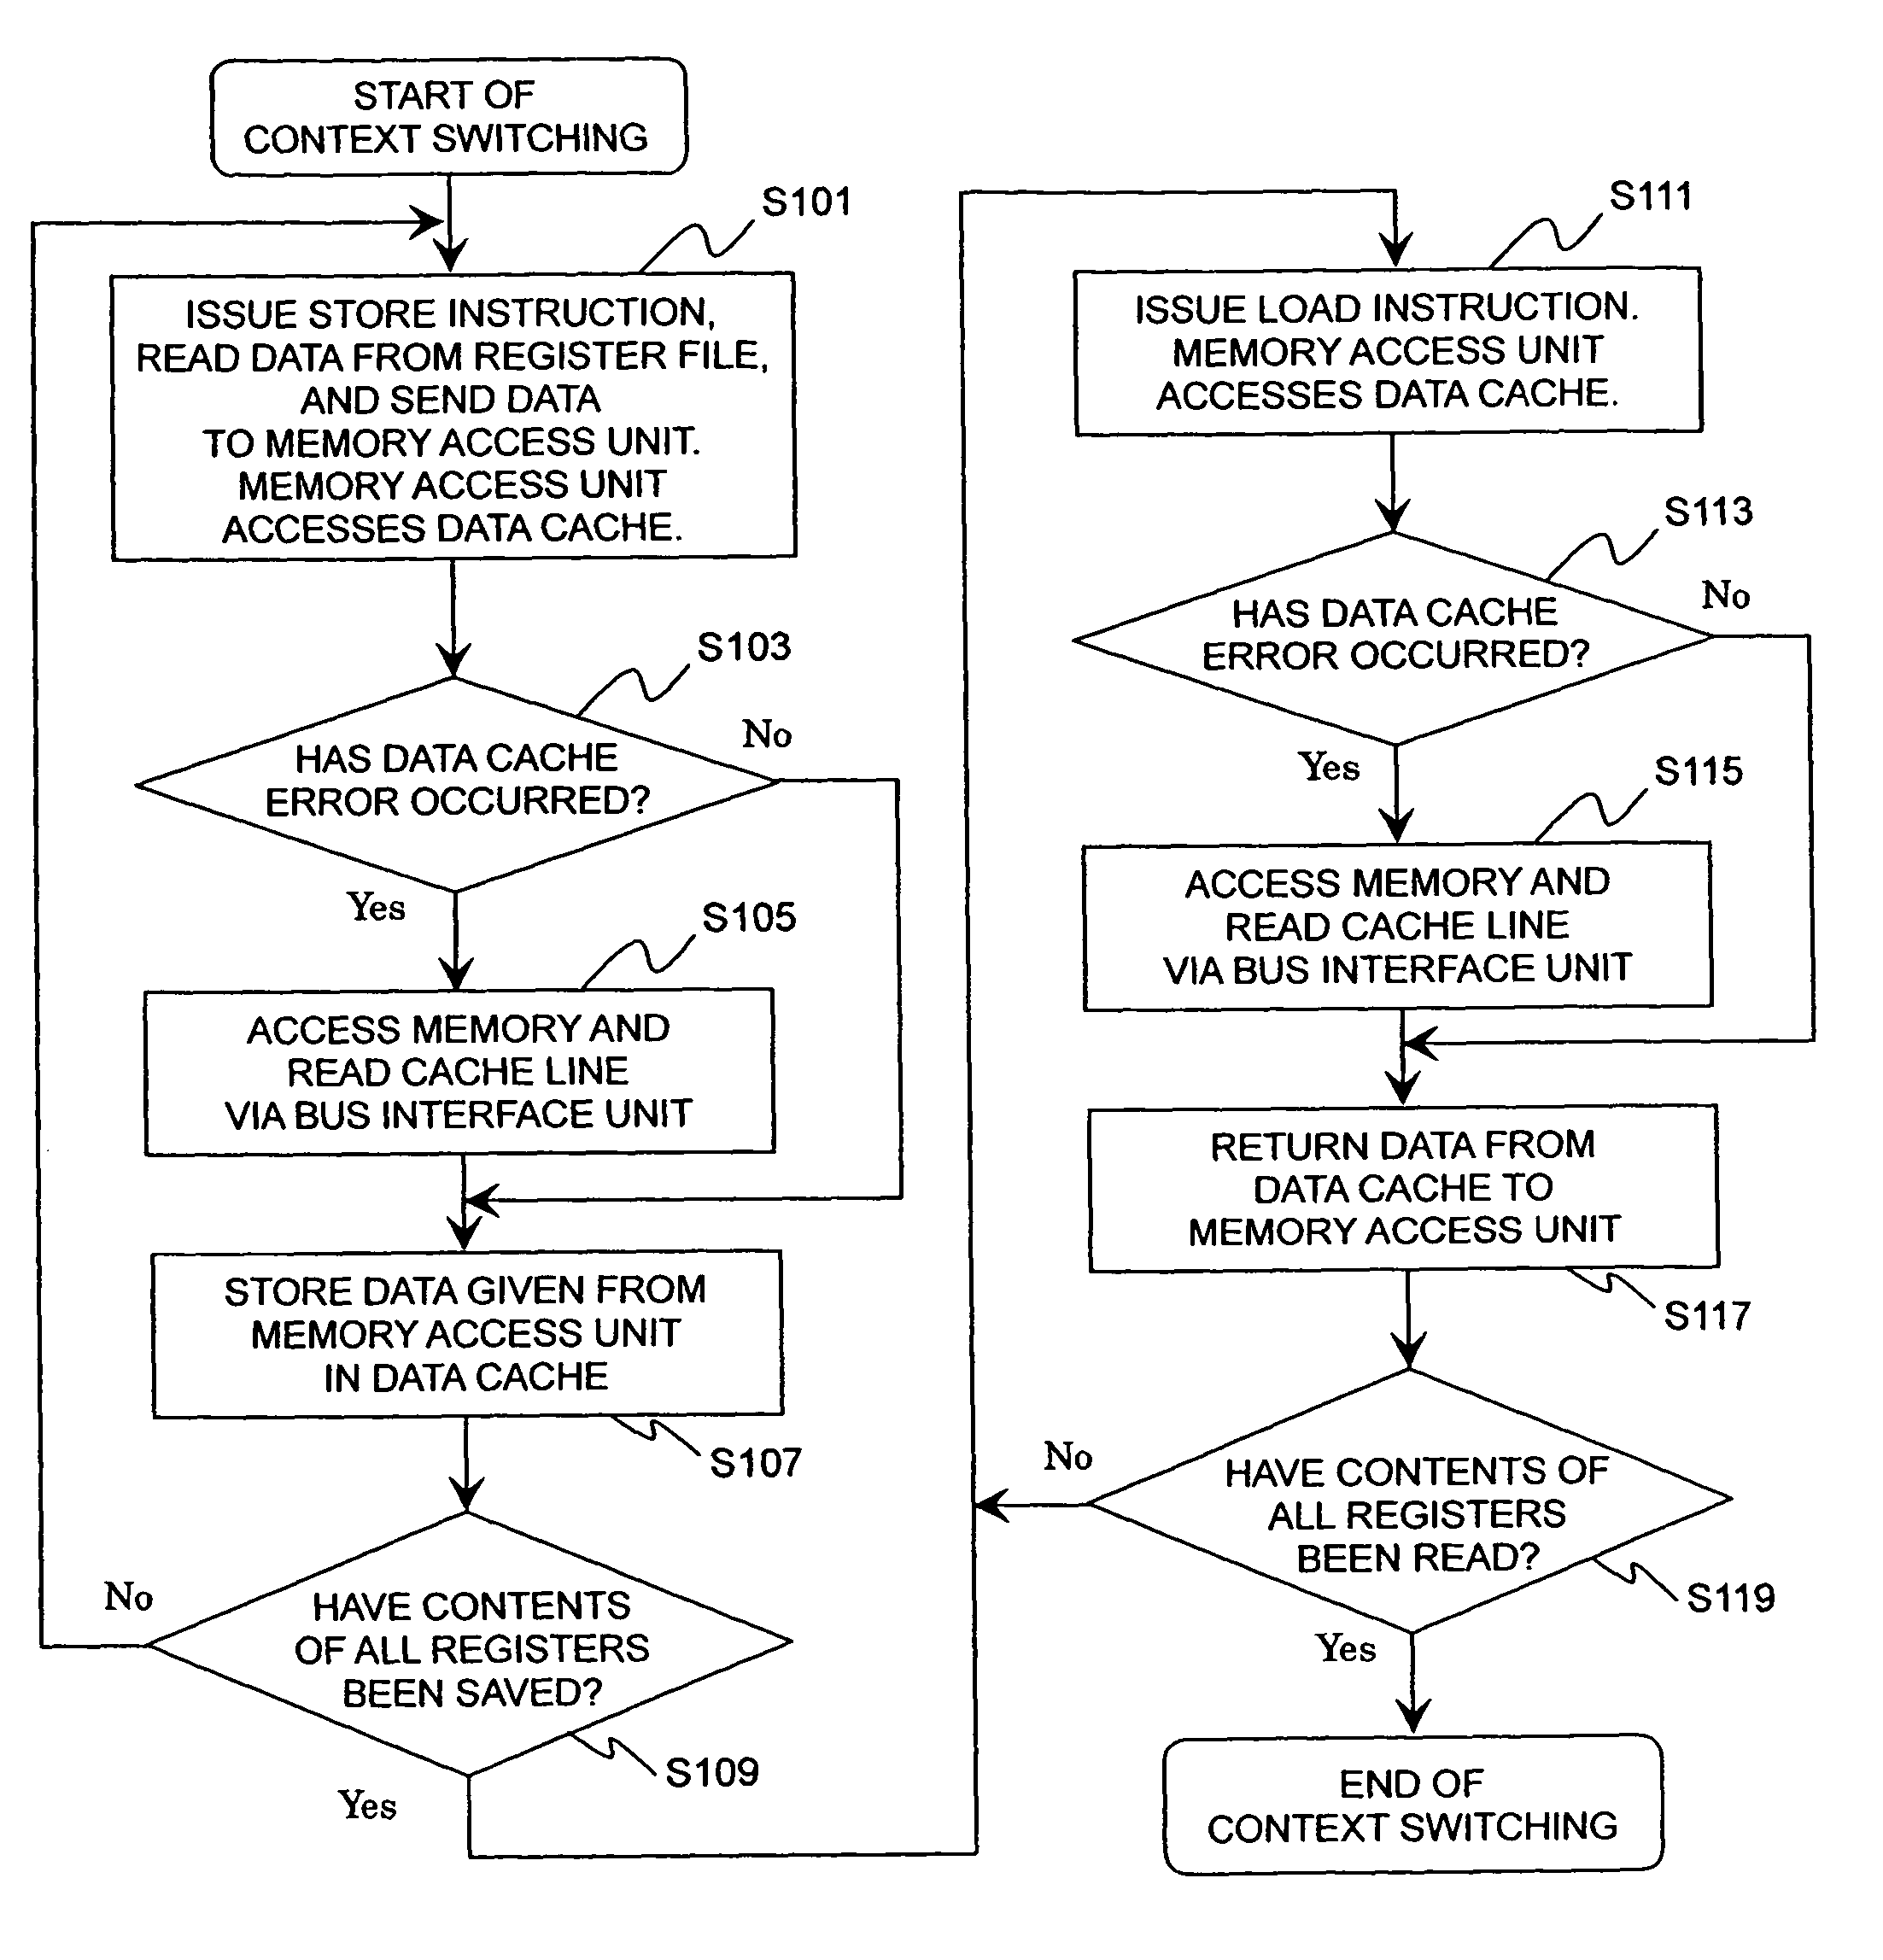 Context switching system having context cache and a register file for the save and restore context operation